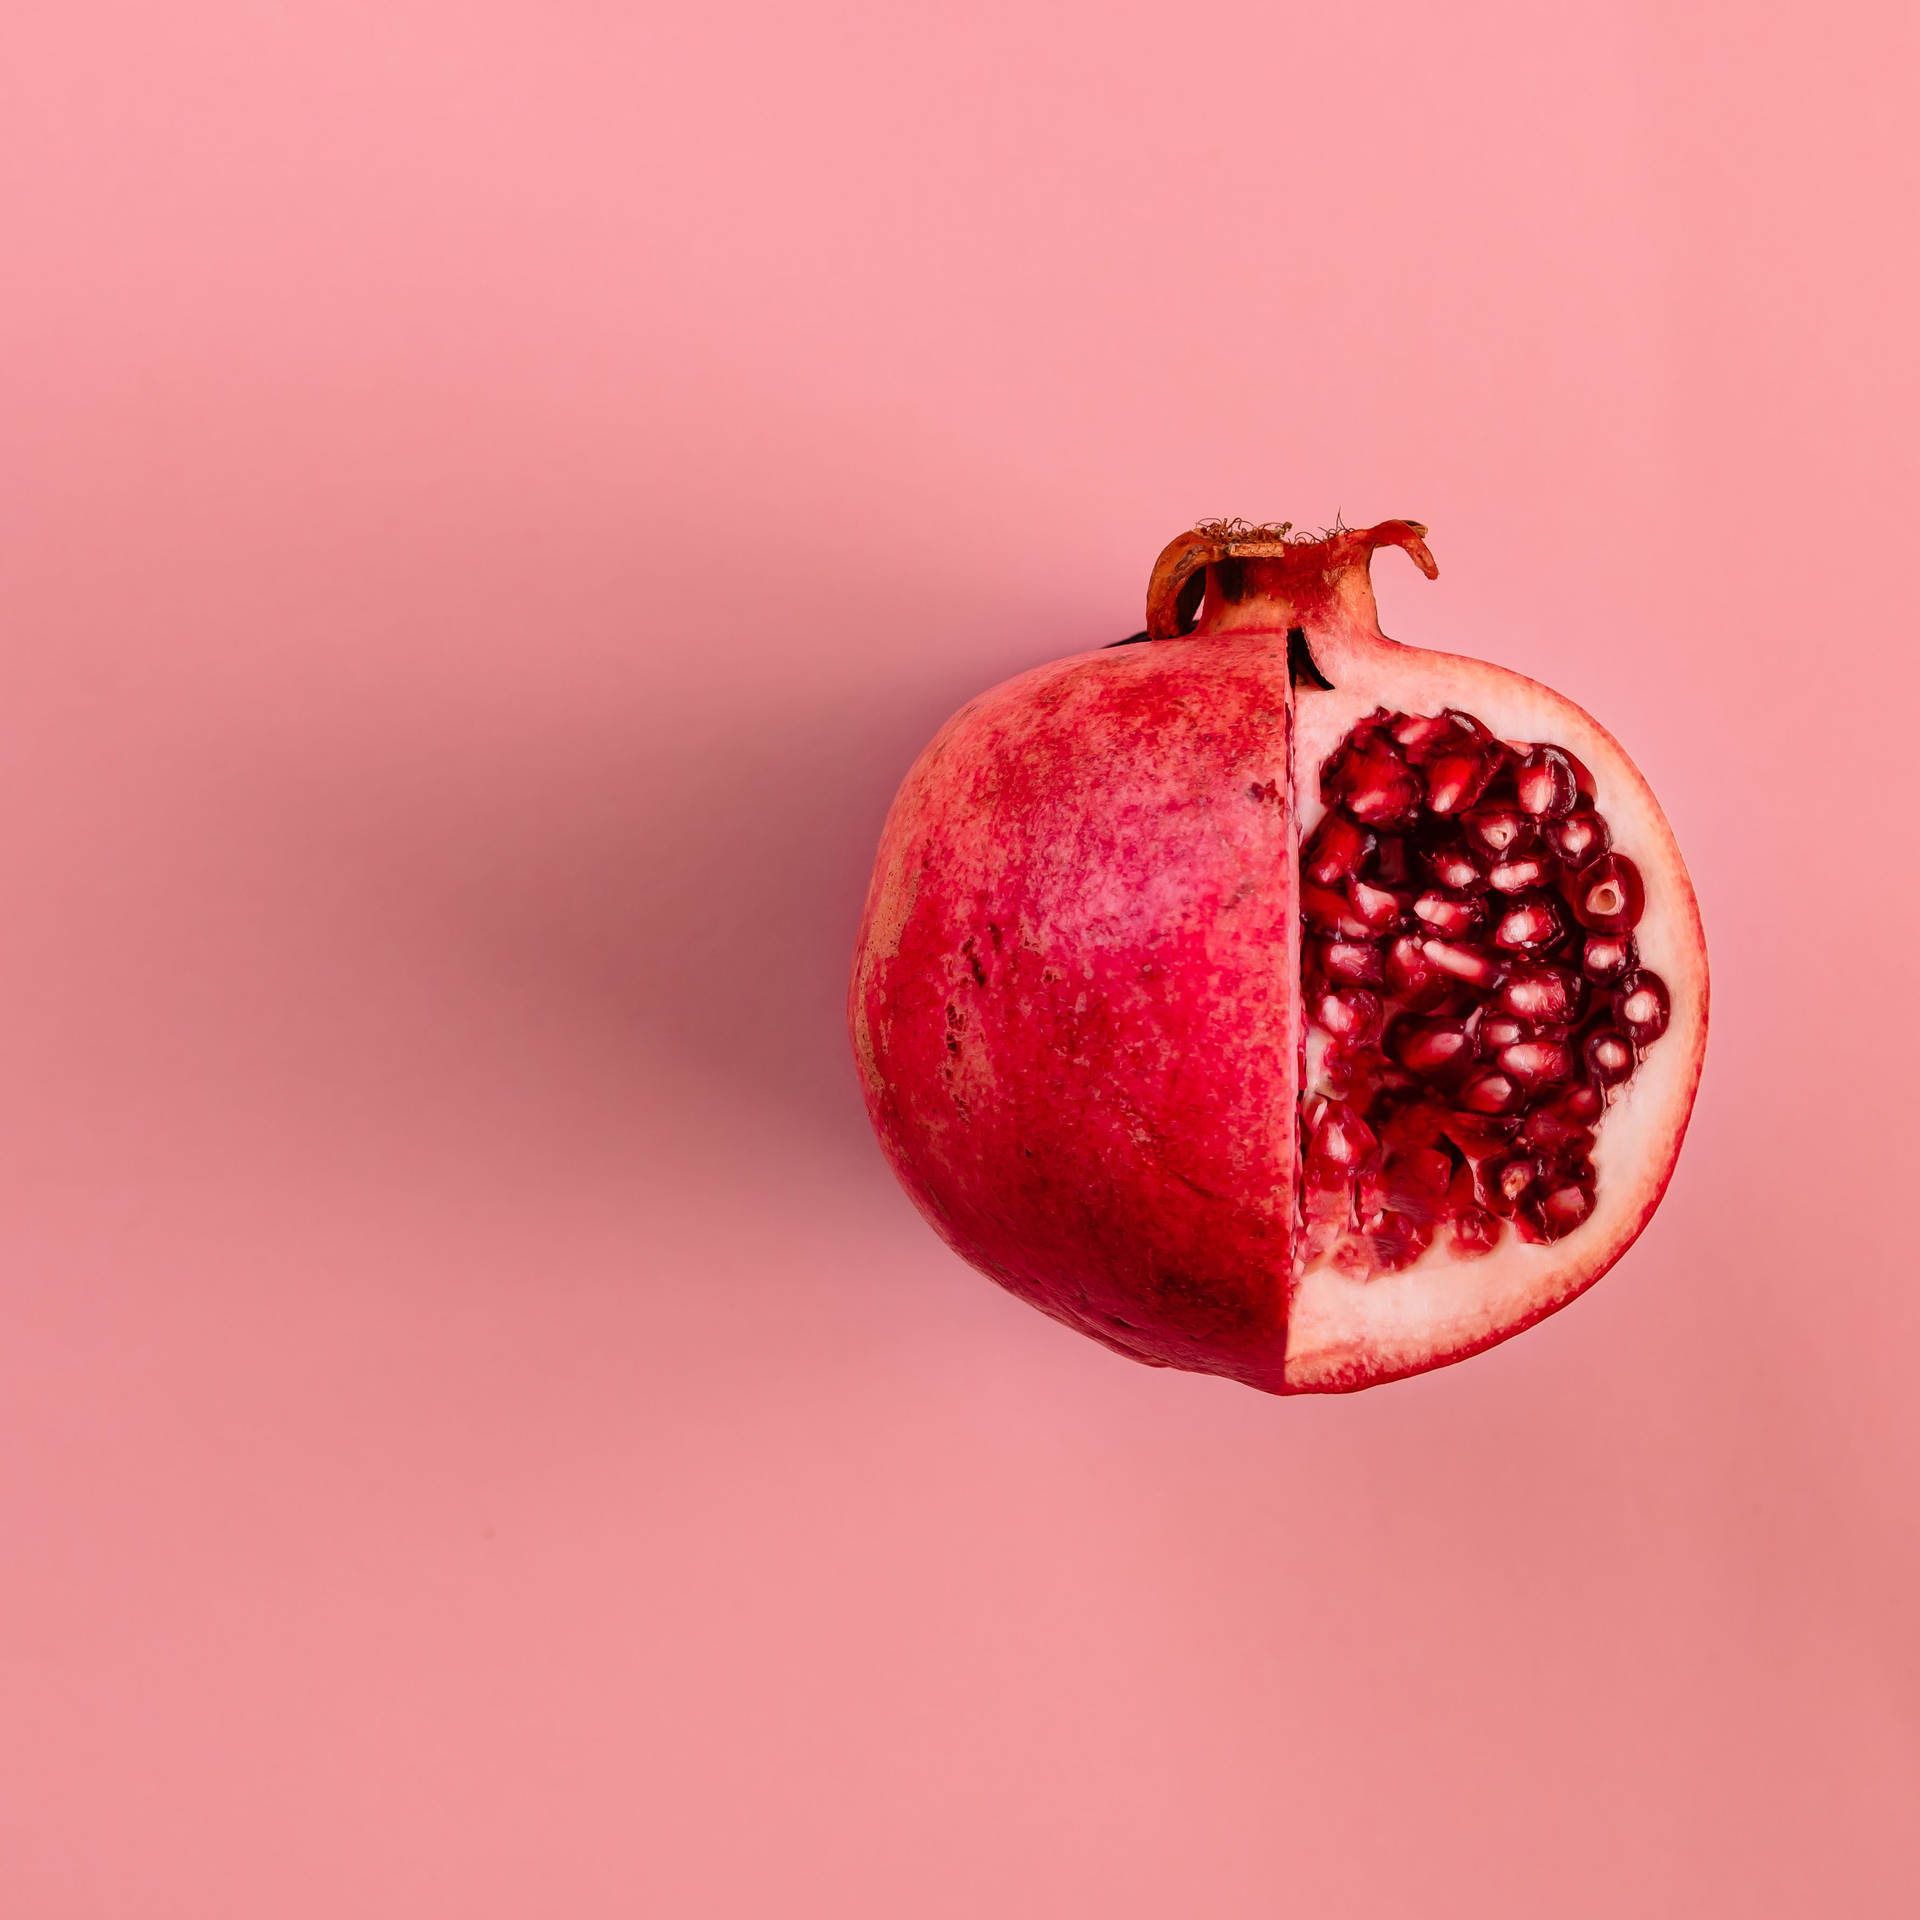 Pomegranate Pastel Red Aesthetic Background